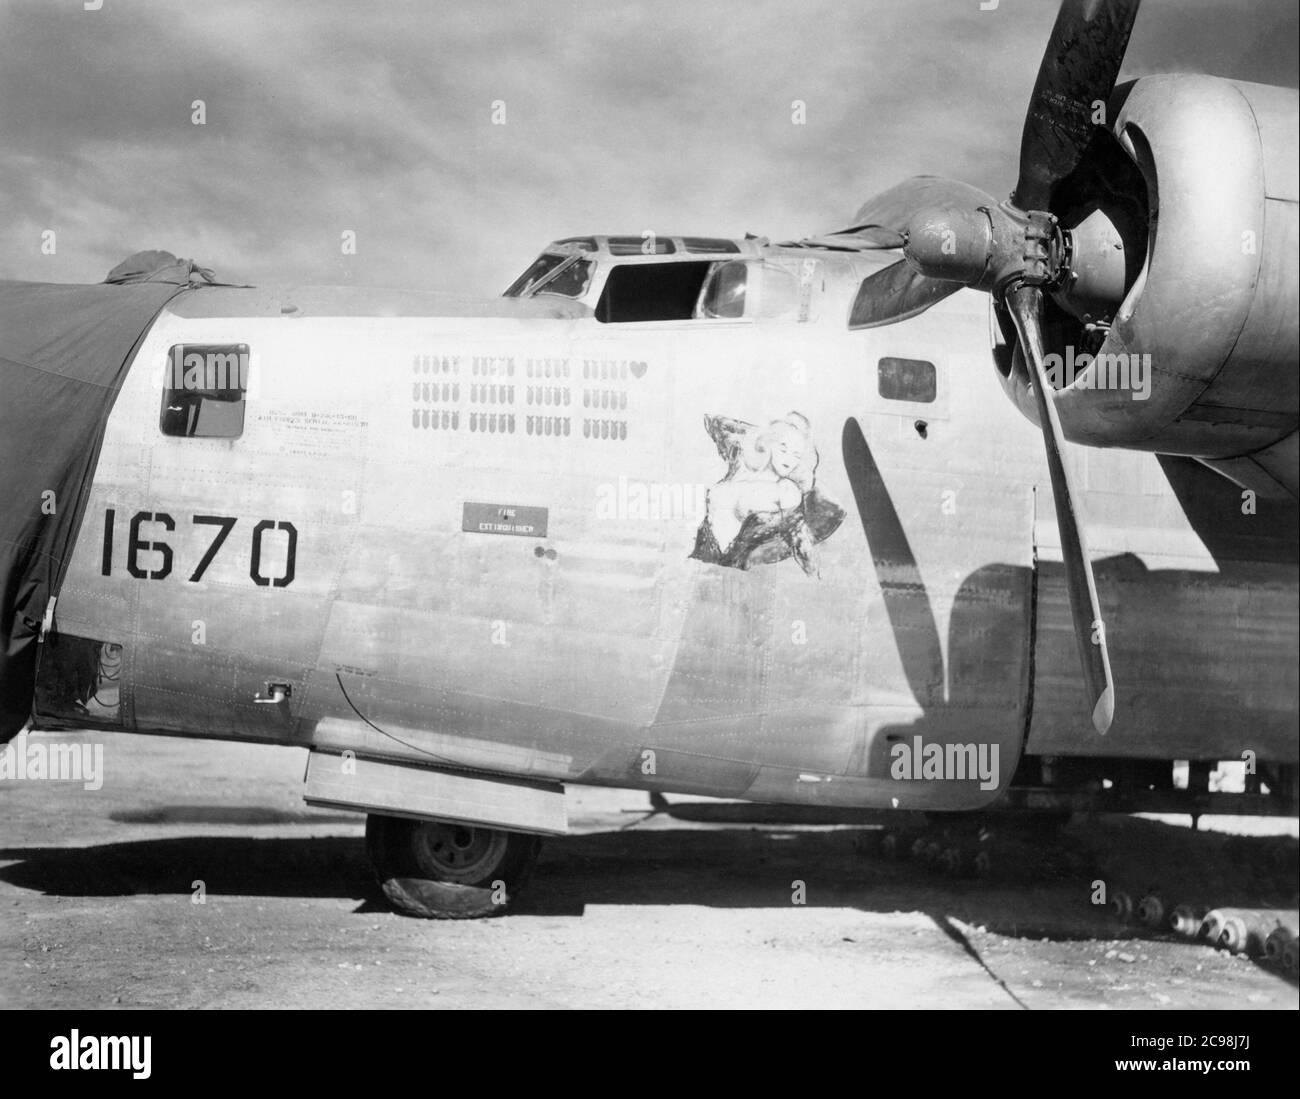 Consolidated B-24 Liberator number 1670 between missions on Guam, July, 1945. As the 75th anniversary of V-J Day approaches, The Consoli Collection has published four photo essays by U.S. Navy Lt. (j.g.) Joseph J. Consoli. The photos were taken between July and December 1945 in the Mariana Islands. They document U.S. Navy life before and after the Japanese surrender. Stock Photo